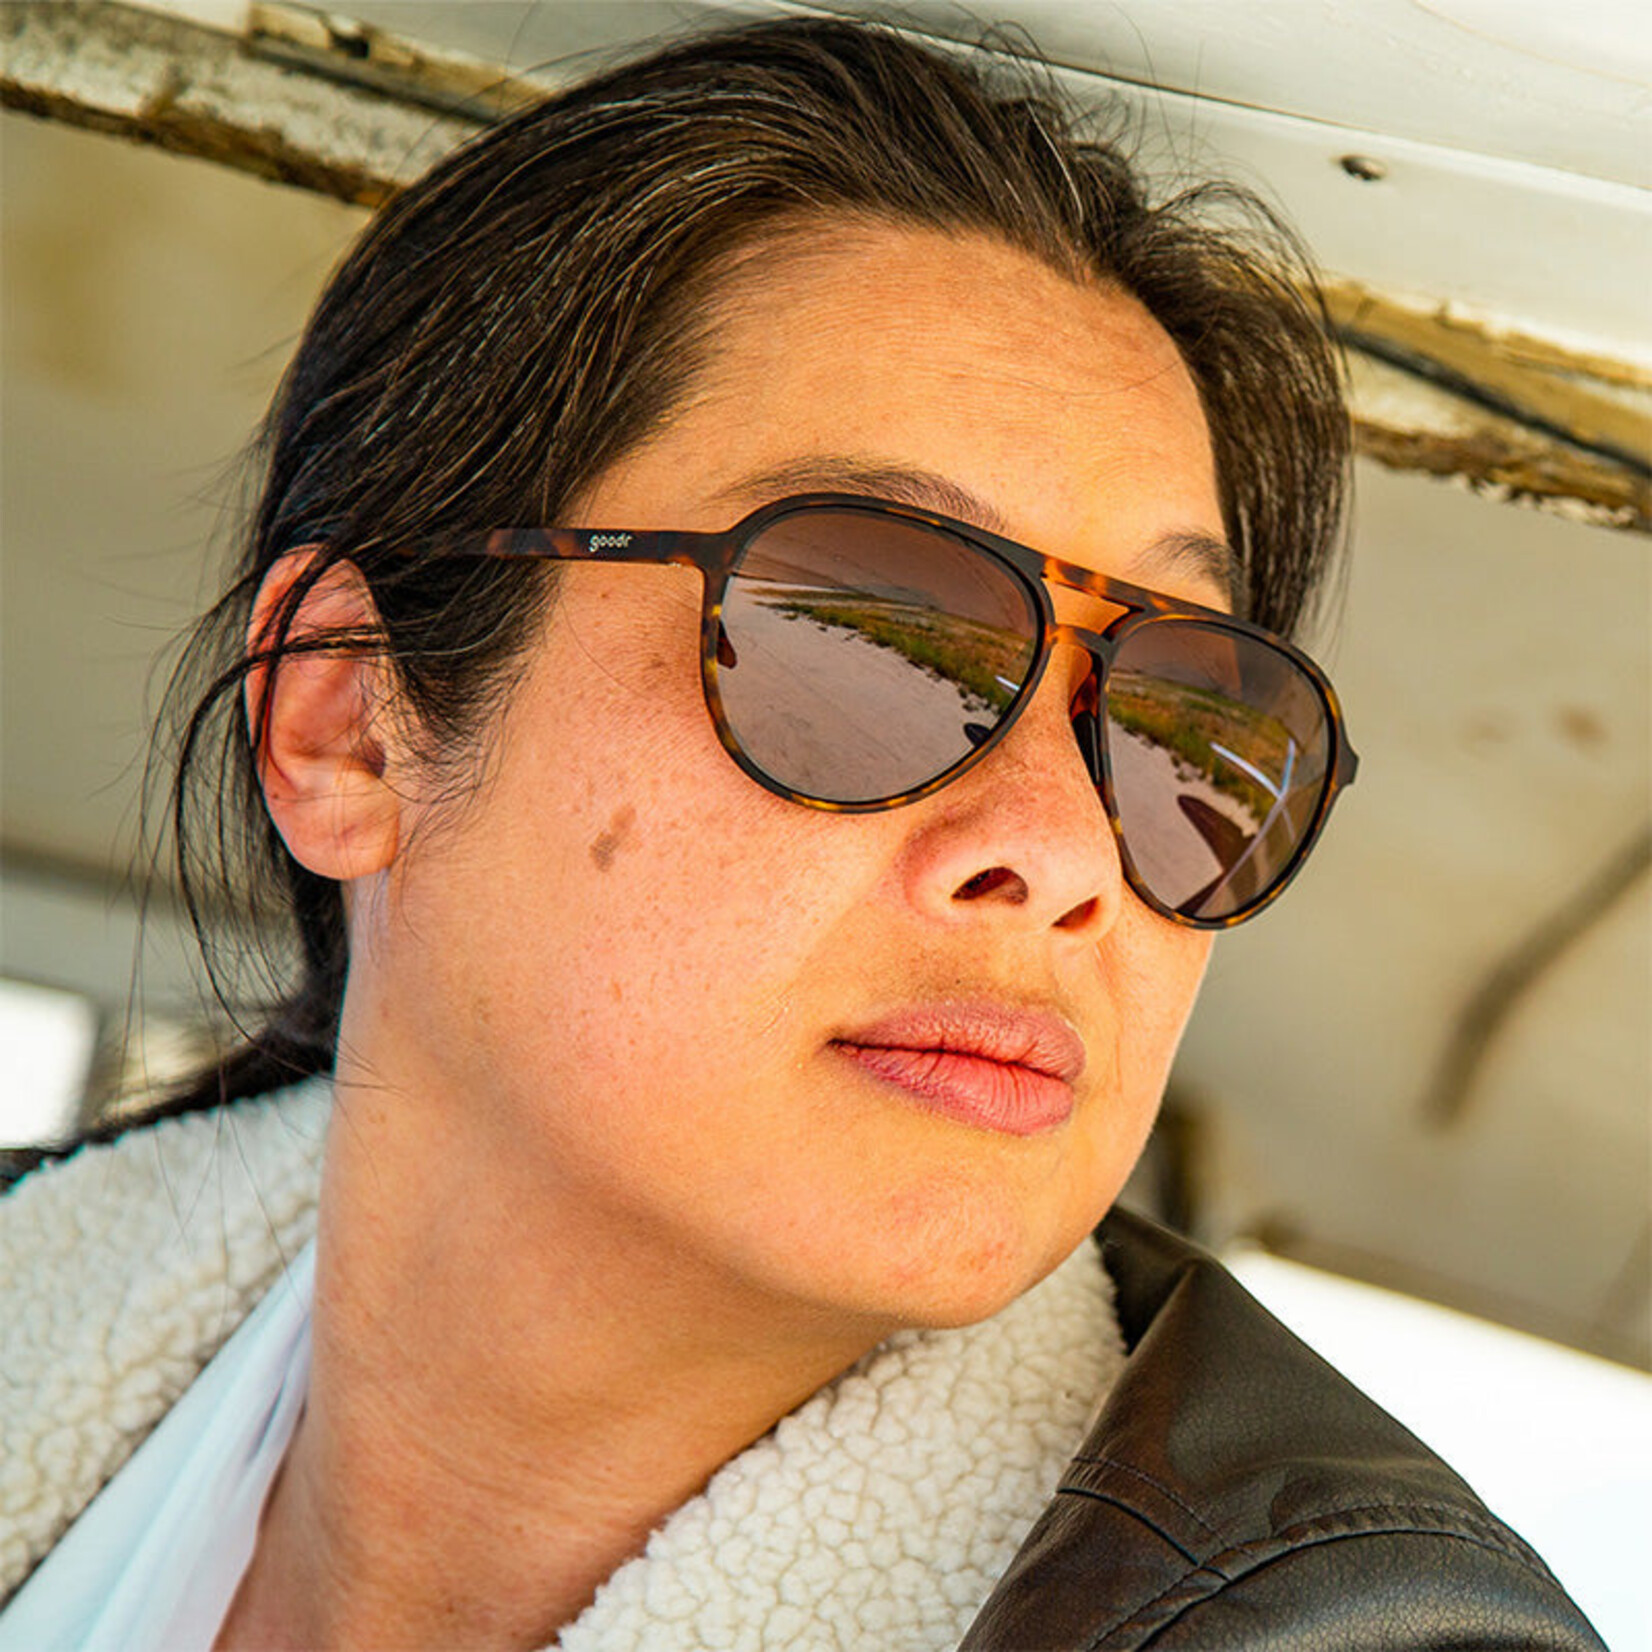 Goodr Goodr - The Mach G - Amelia Earhart Ghosted Me Sunglasses